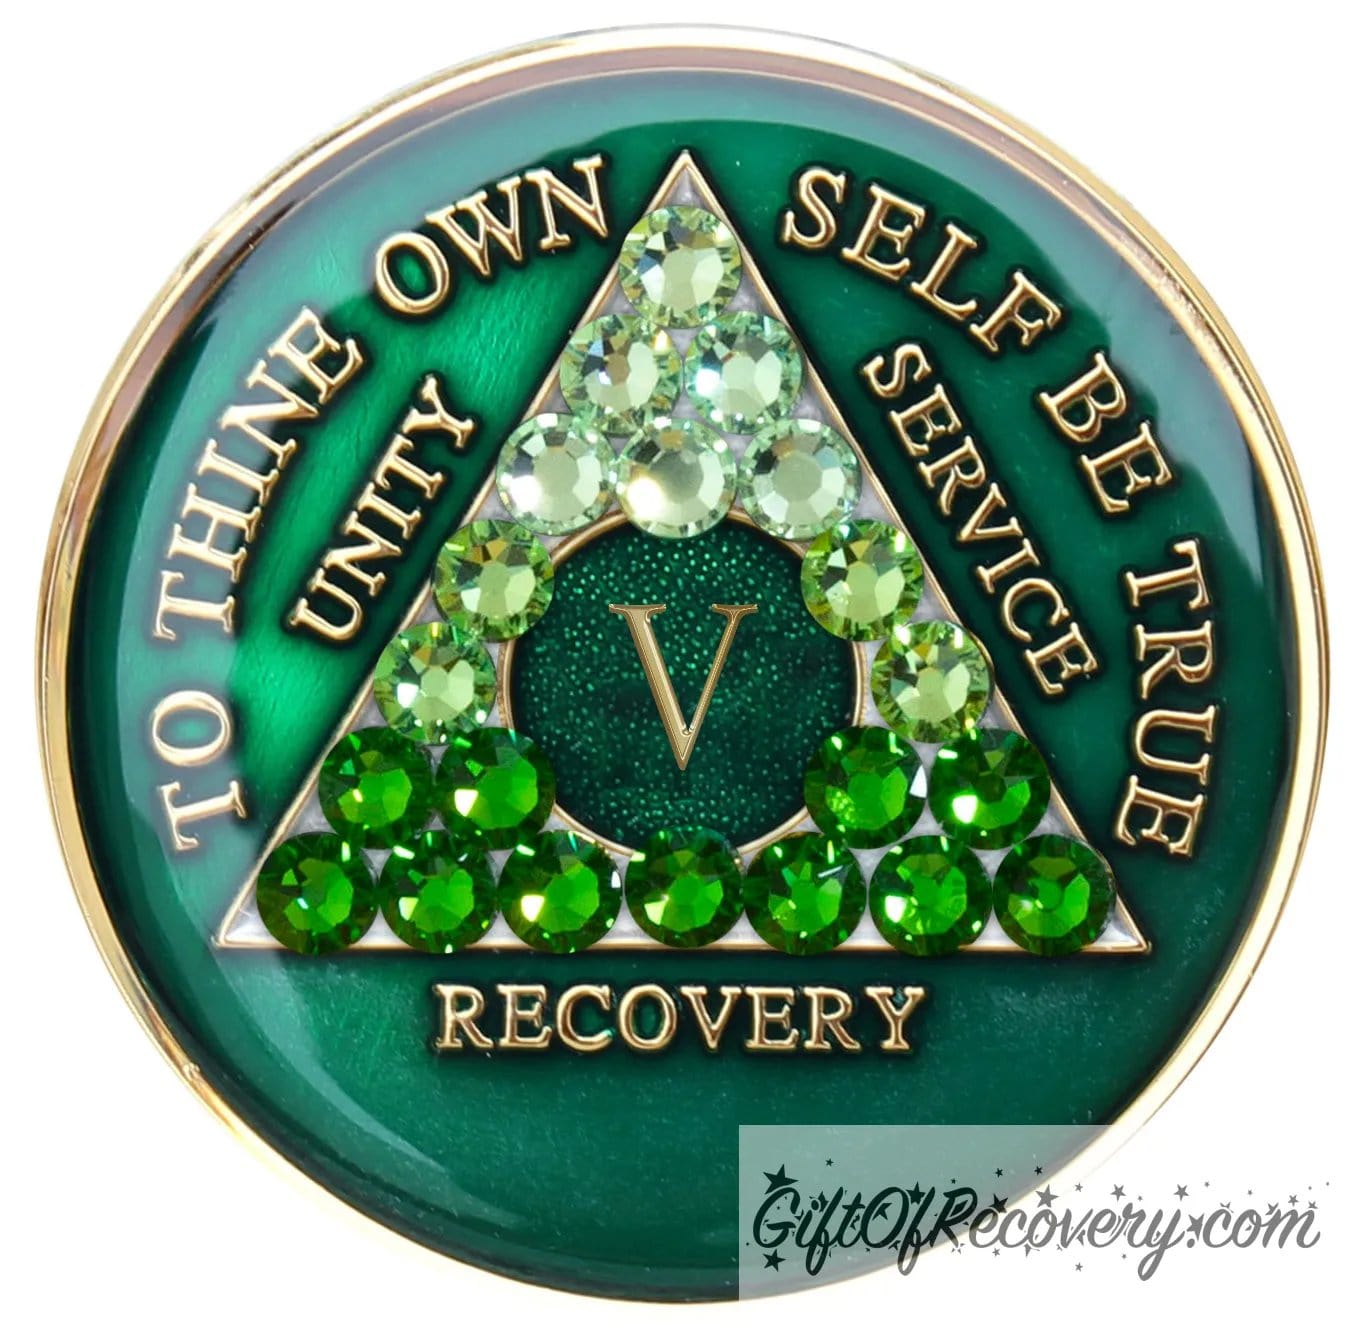 5 year AA medallion, emerald green with 21 genuine green crystals ranging from light to dark green in the shape of the triangle in the center to emphasize the transformation in the recovery journey, to thine own self be true, roman number, unity, service recovery are embossed in 14k gold-plated brass, the middle circle is sparkle green and the recovery medallion is sealed in resin for a shiny finish that lasts.